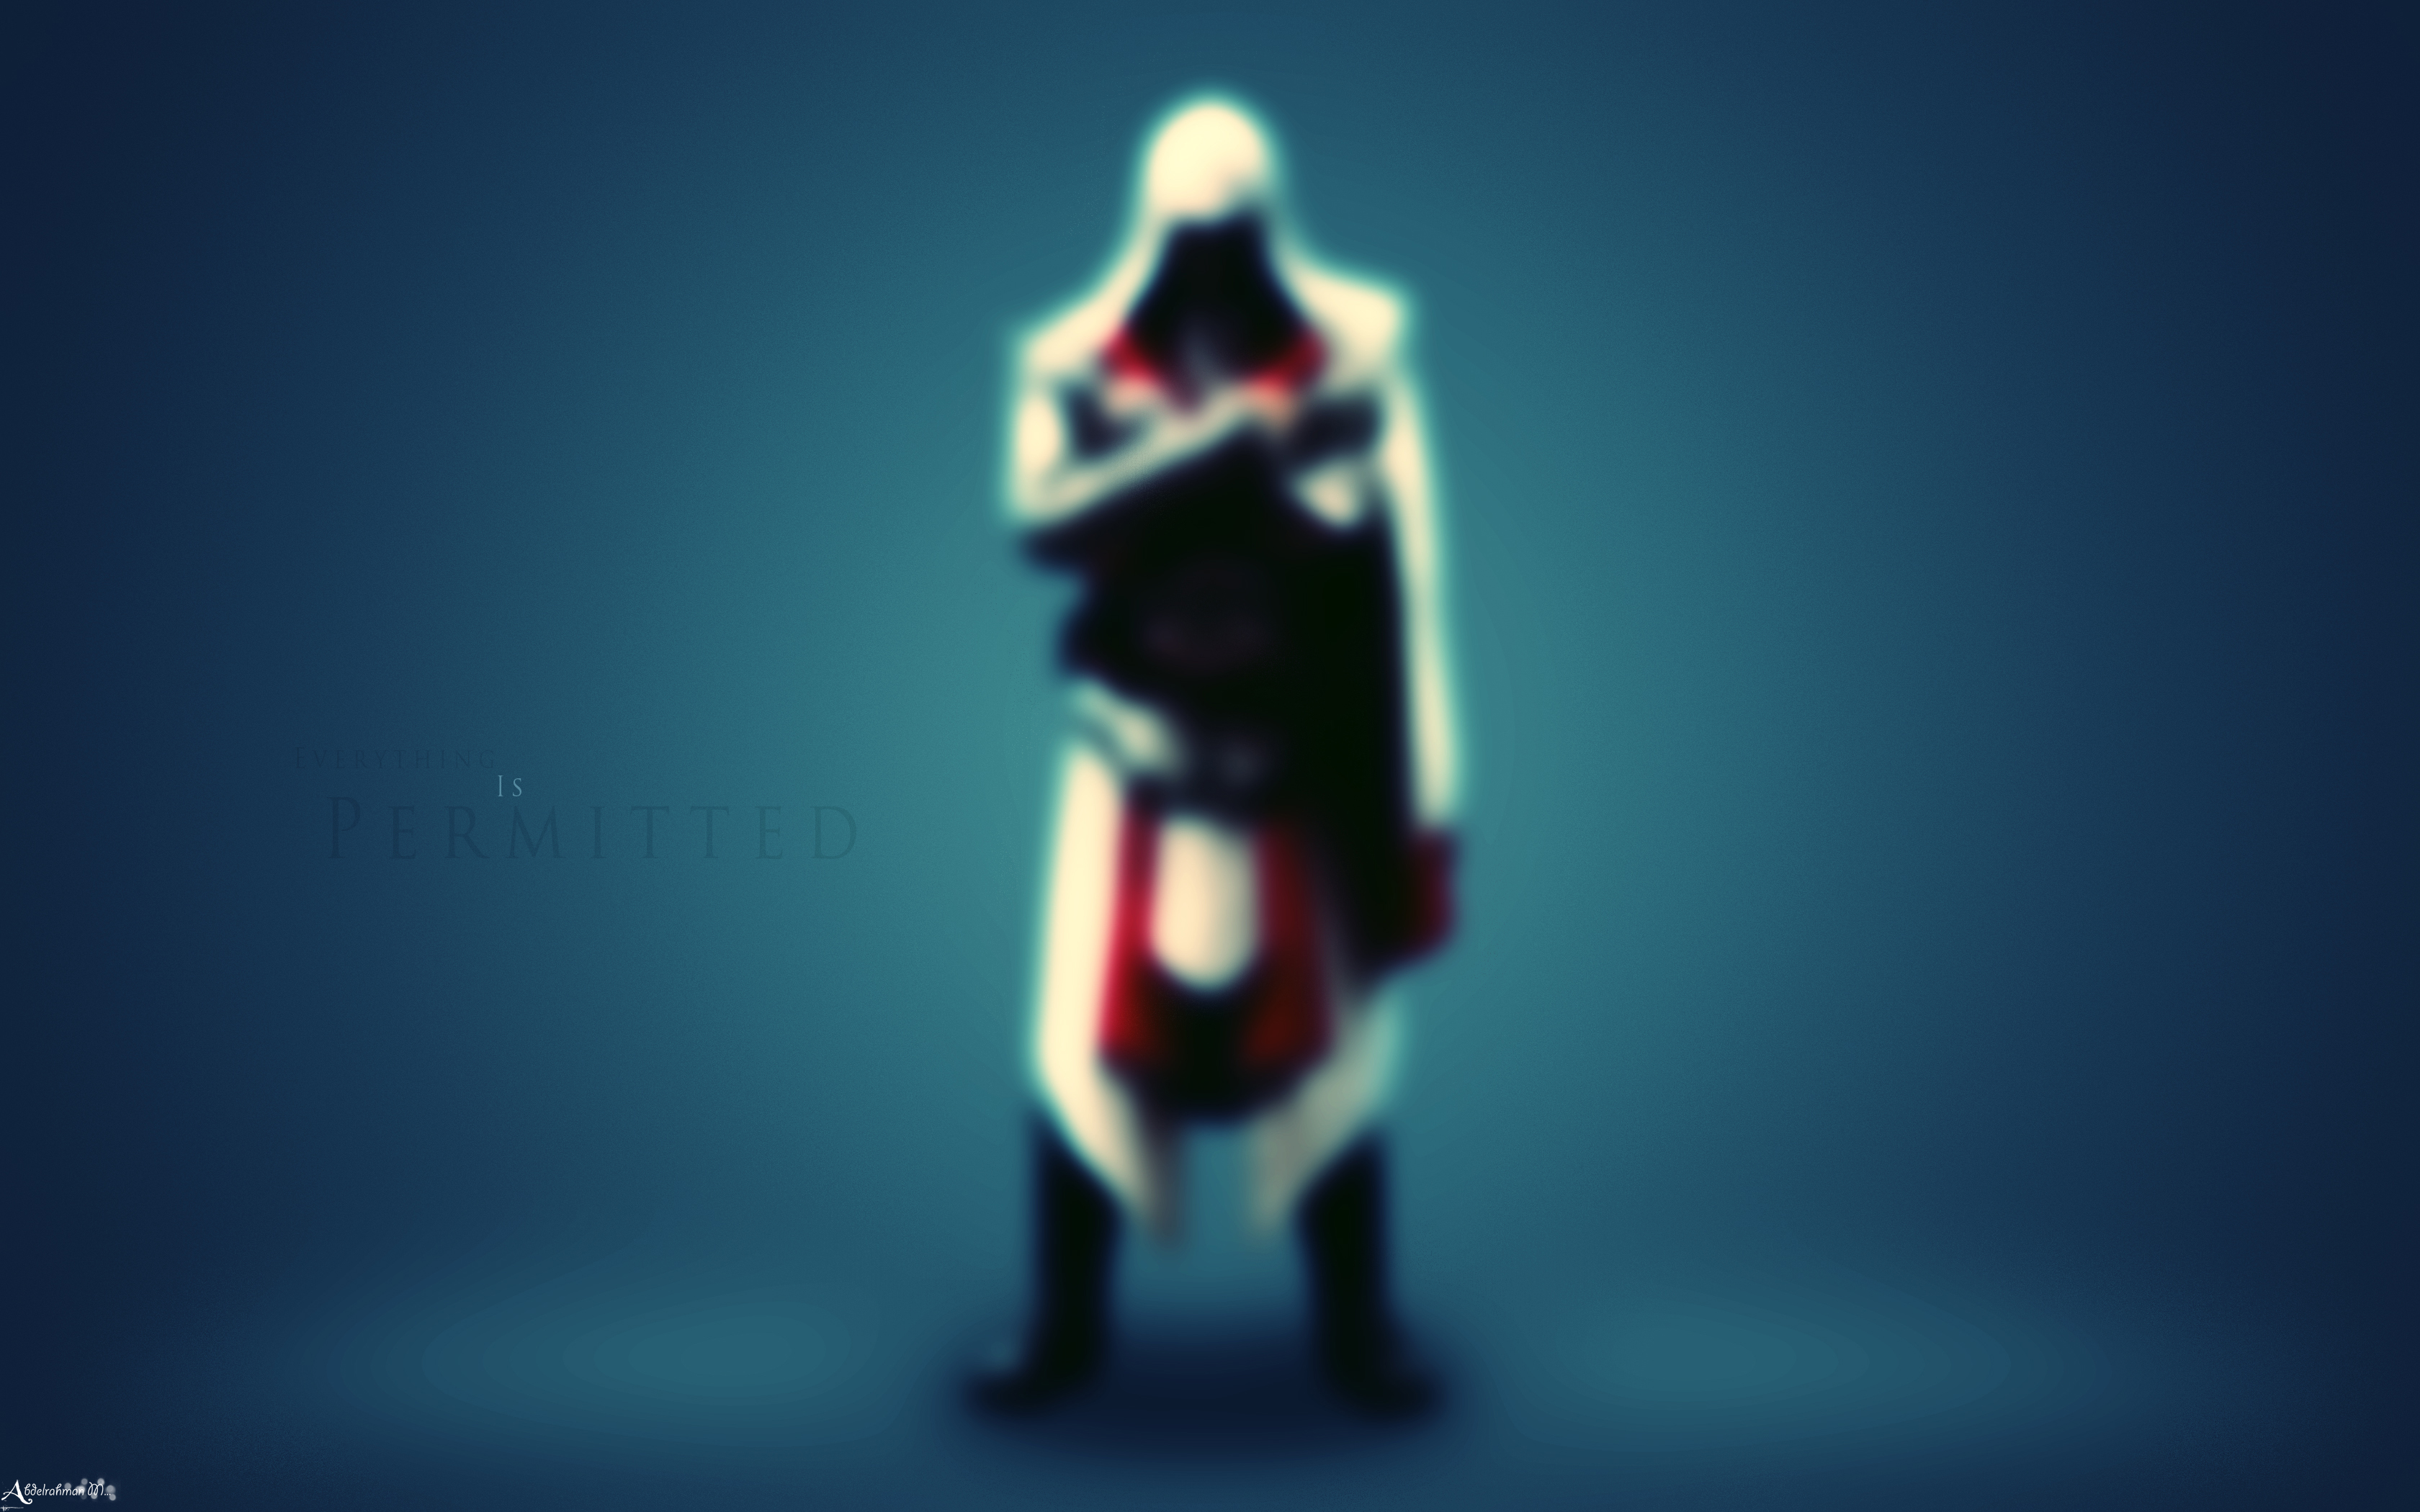 Assassin's Creed: Brotherhood desktop wallpaper featuring Ezio, the iconic video game character.